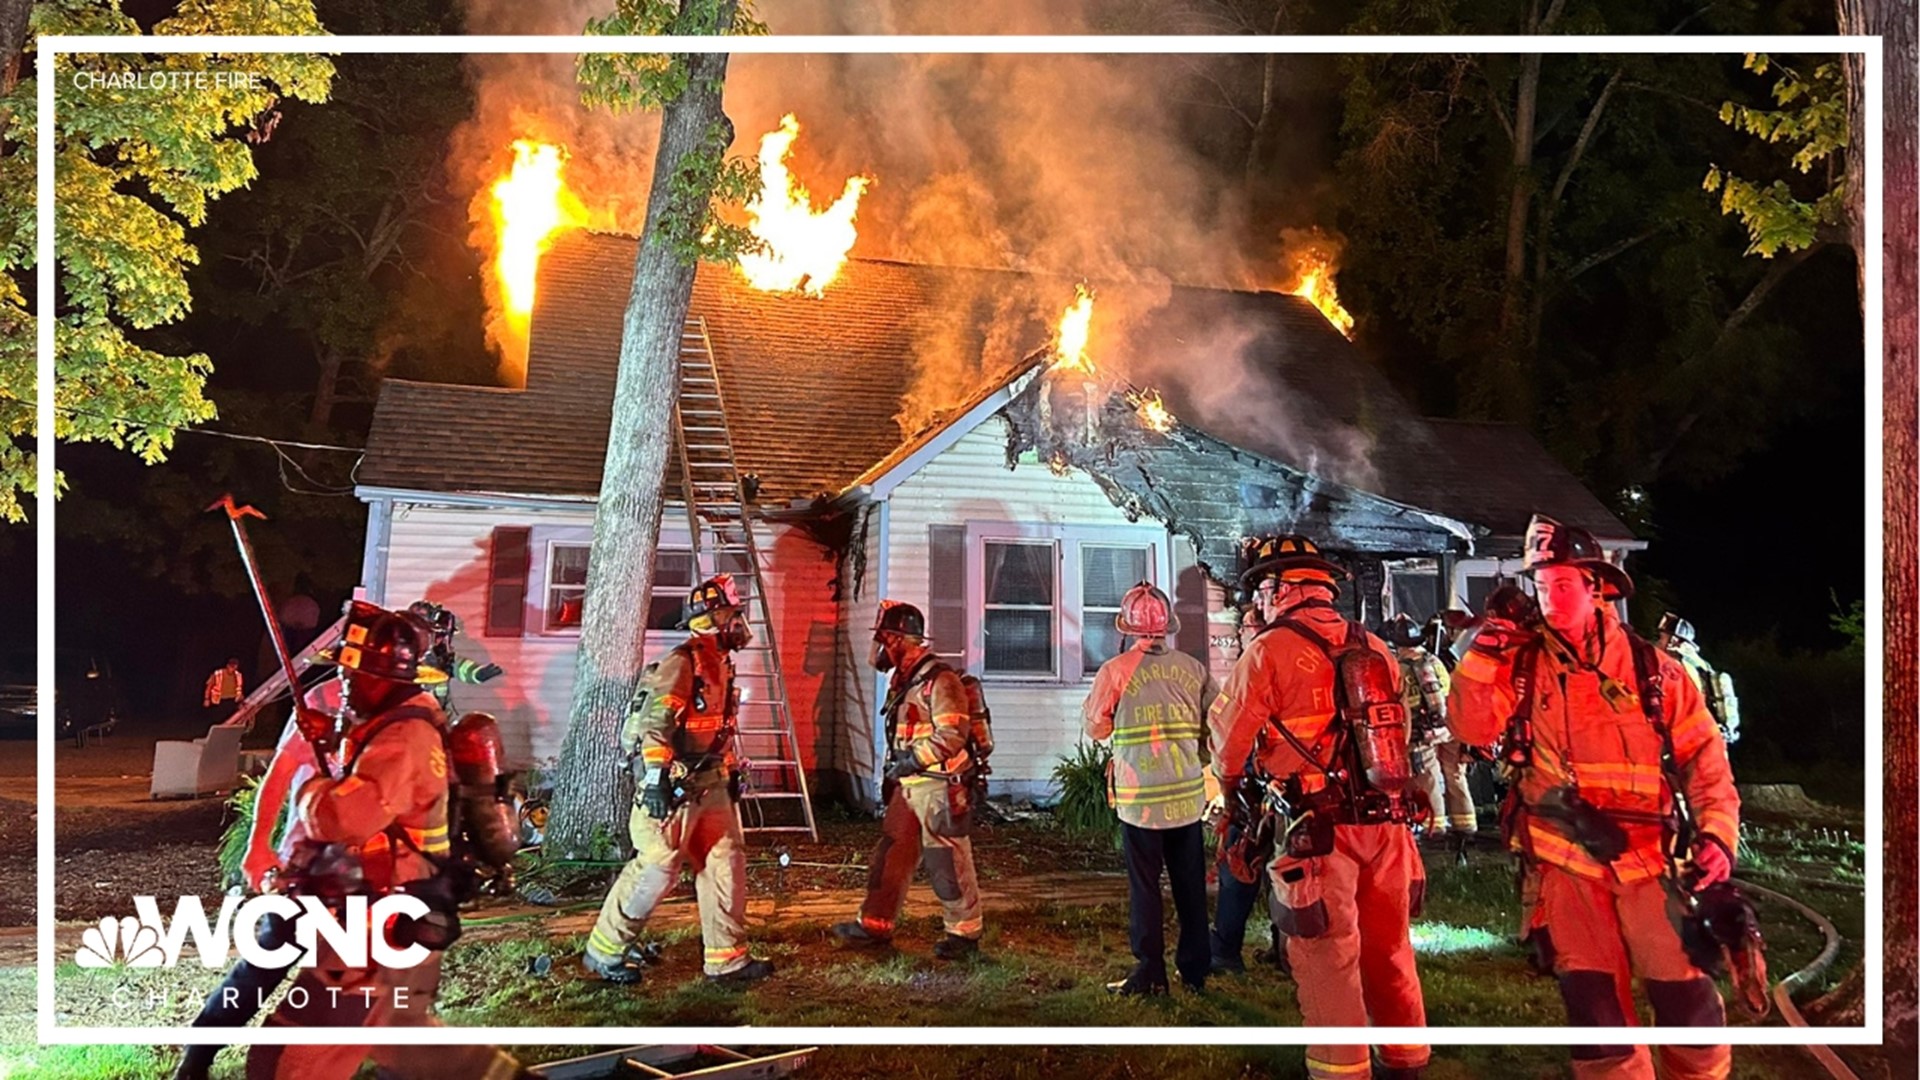 Fire crews responded to an early morning house fire that left three firefighters injured. WCNC Charlotte's Destiny Richards is on scene with more details.